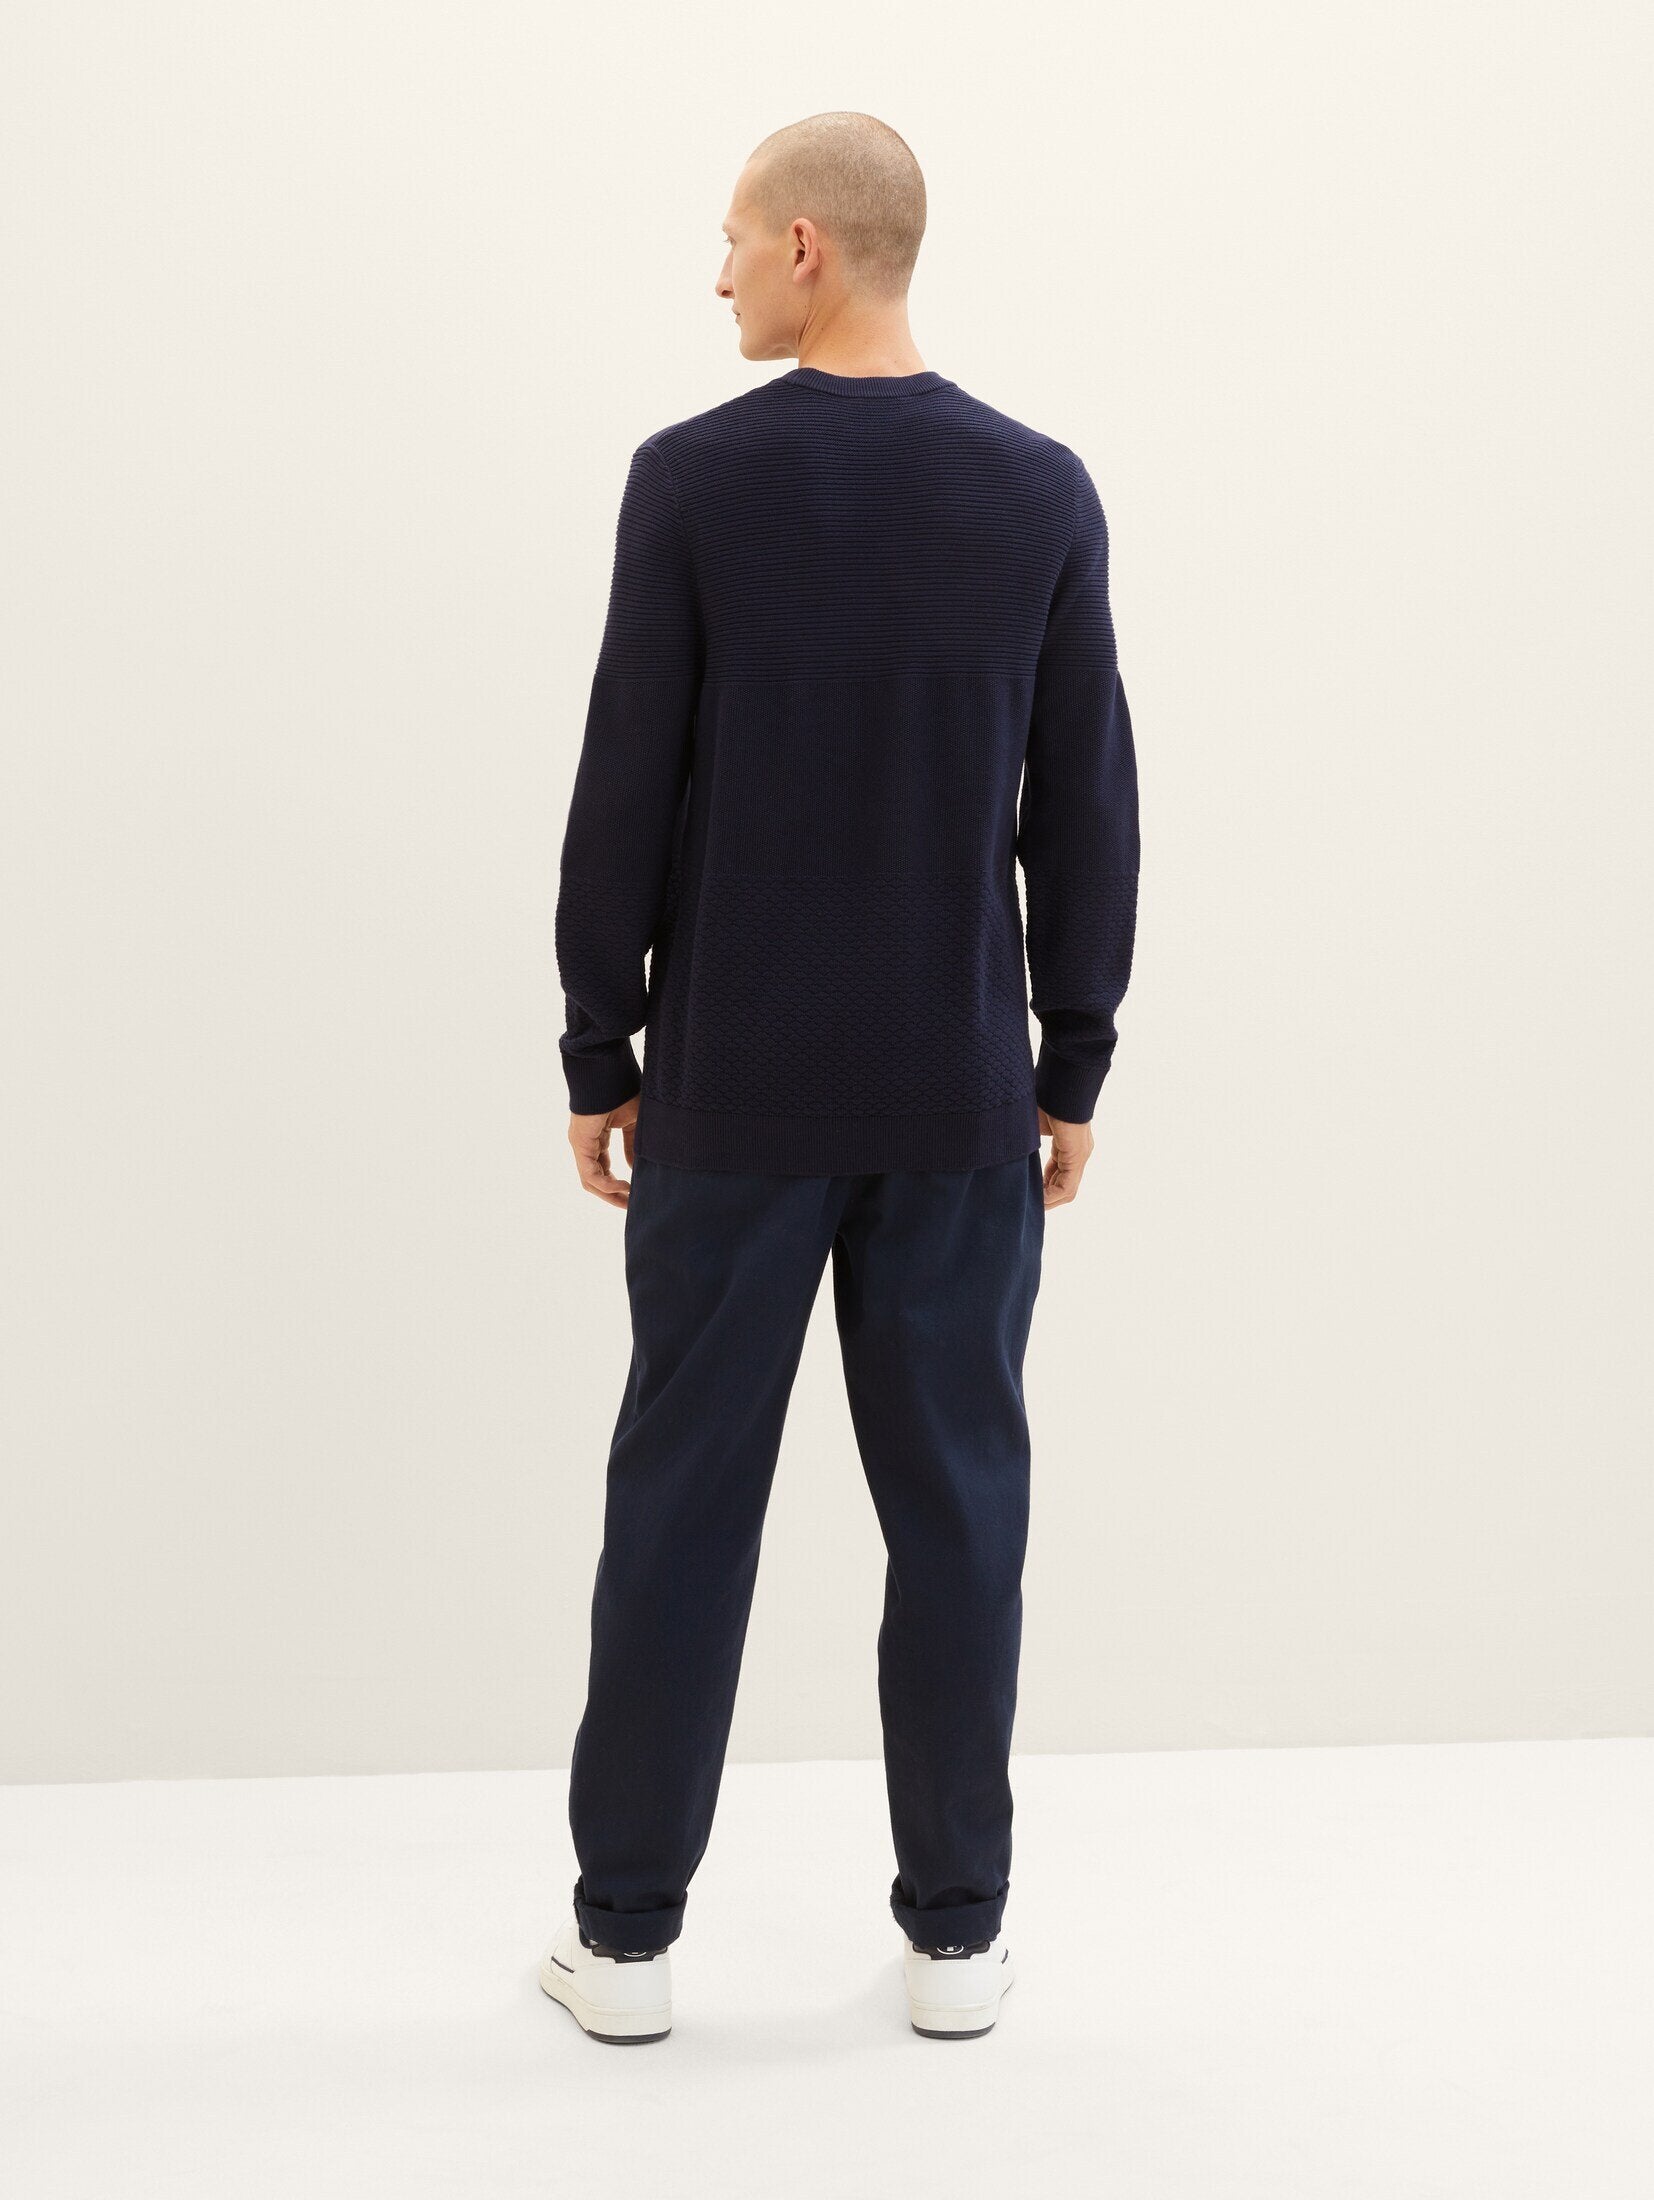 Tom Tailor Knitted Patterned Navy Sweater